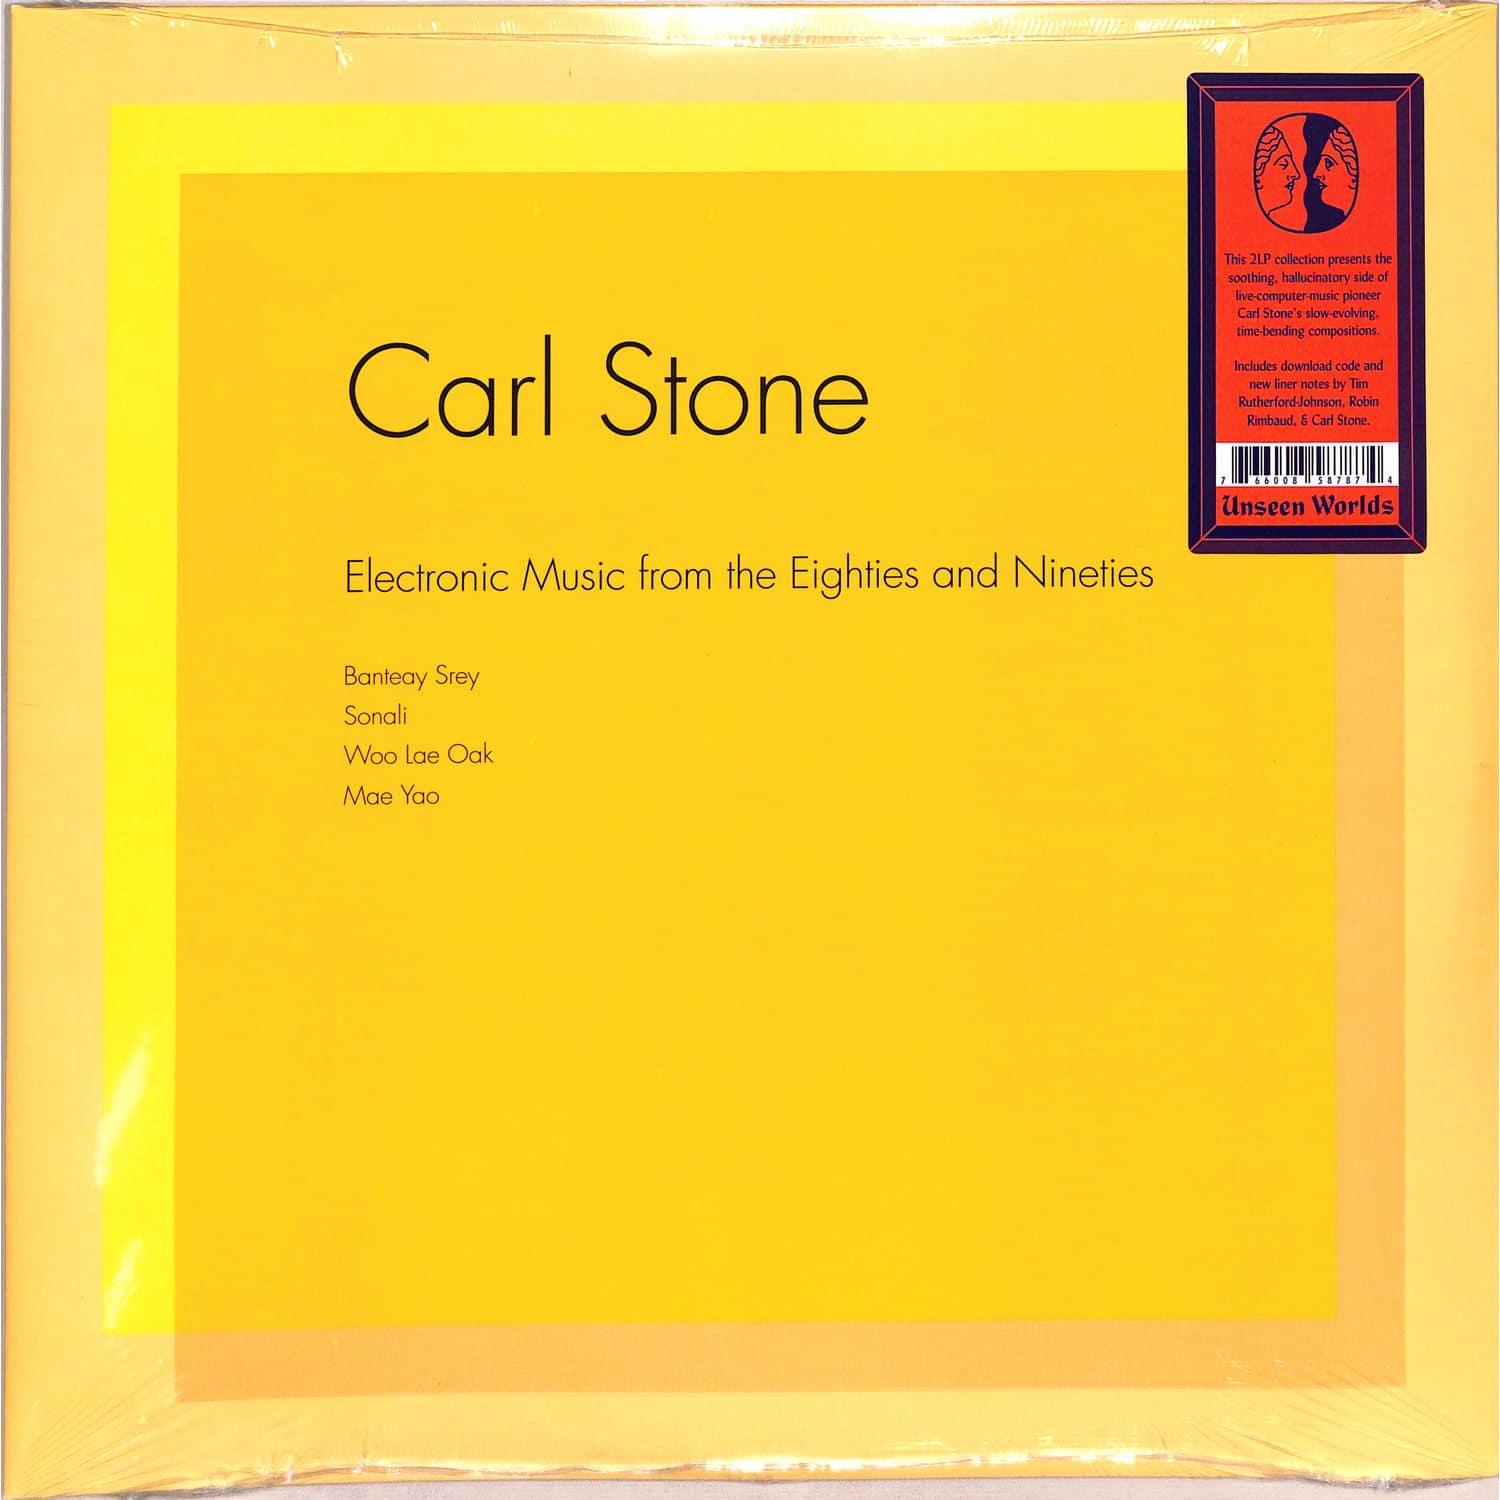 Carl Stone - ELECTRONIC MUSIC FROM THE EIGHTIES AND NINETIES 